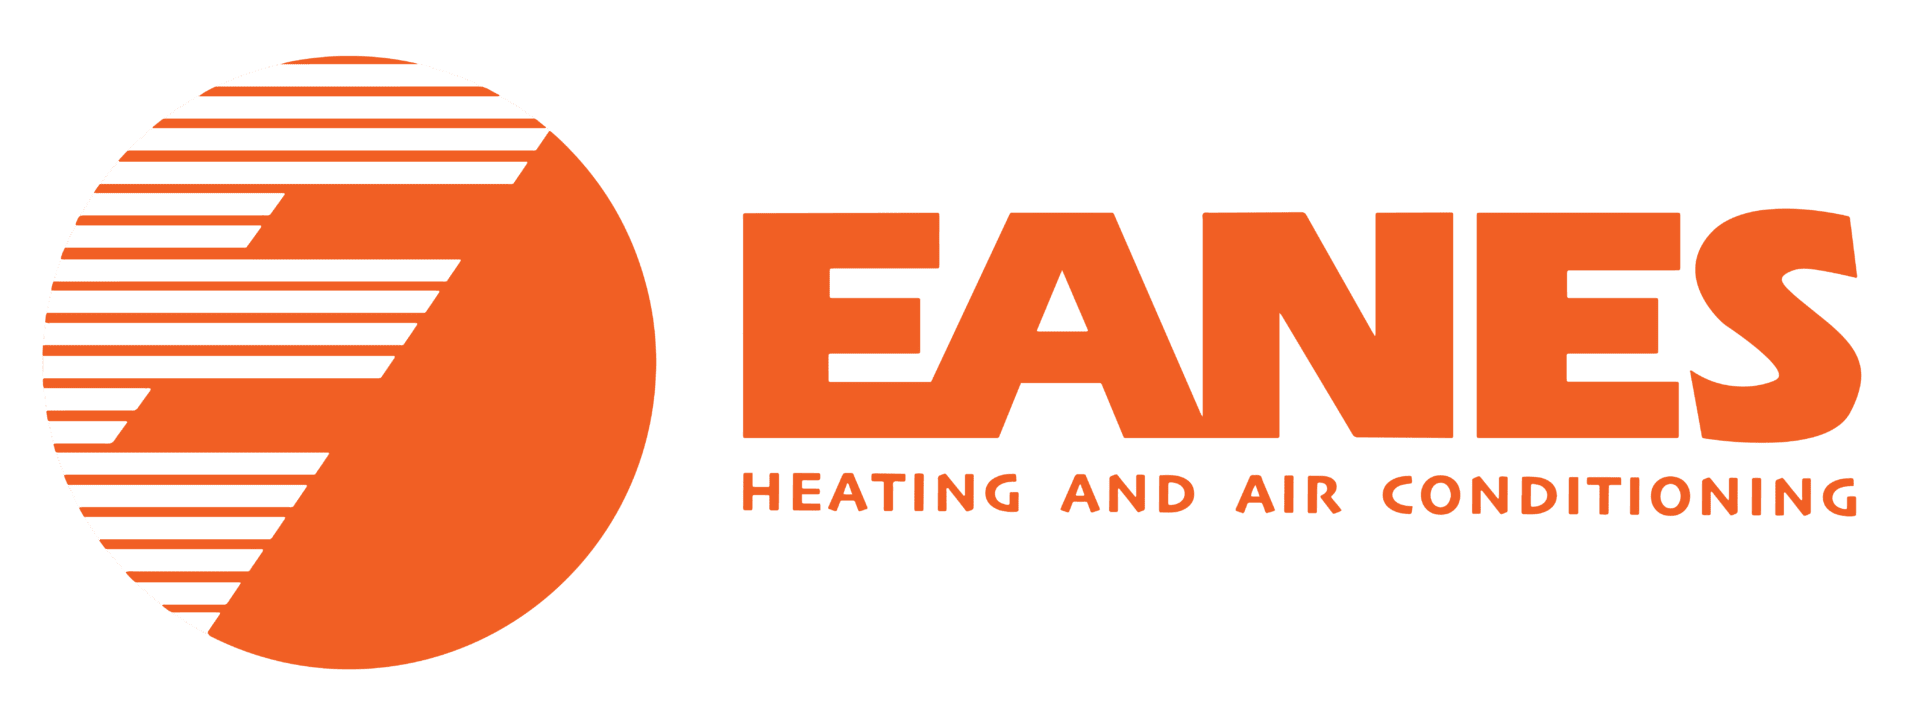 5 Ways to Prevent Cold Spots in Your Home During the Winter Months | Eanes Heating & Air